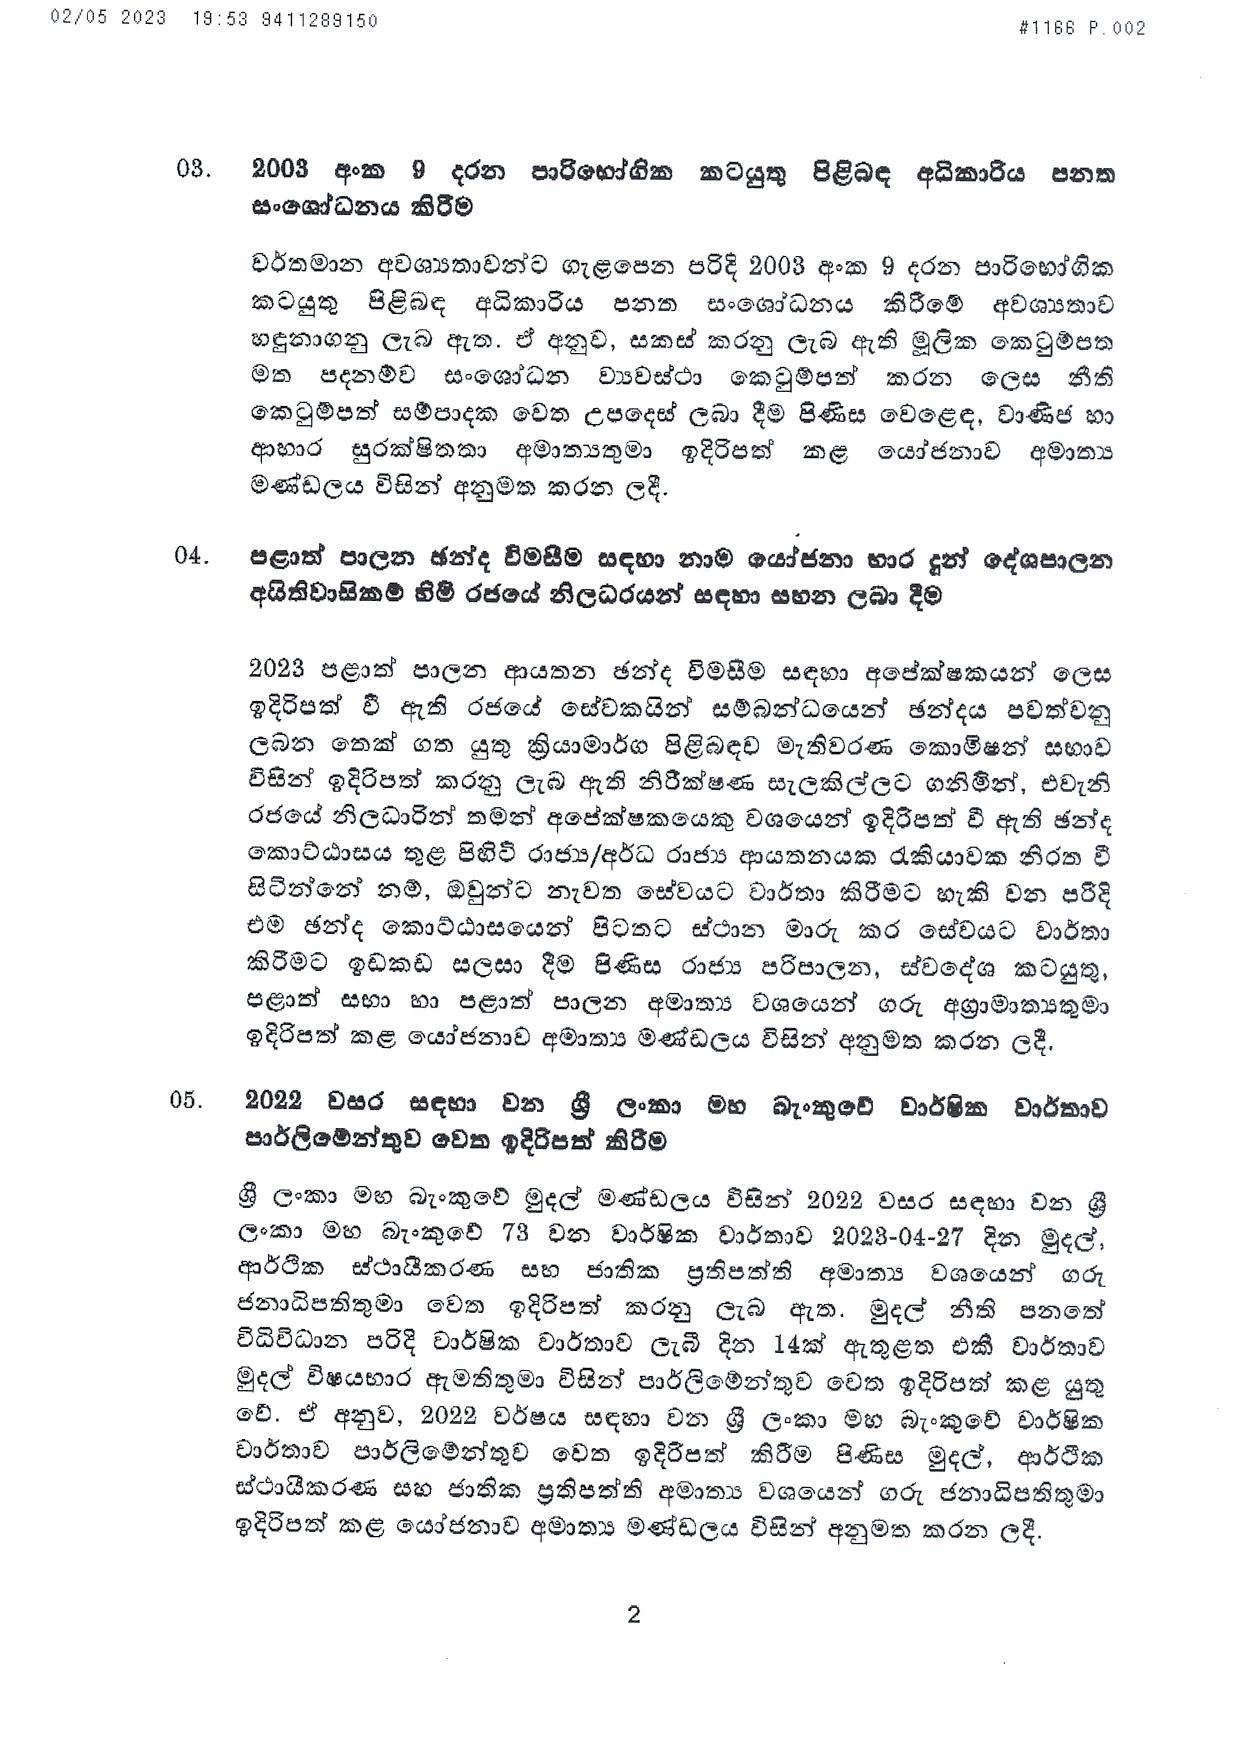 Cabinet Decisions on 02.05.2023 page 002